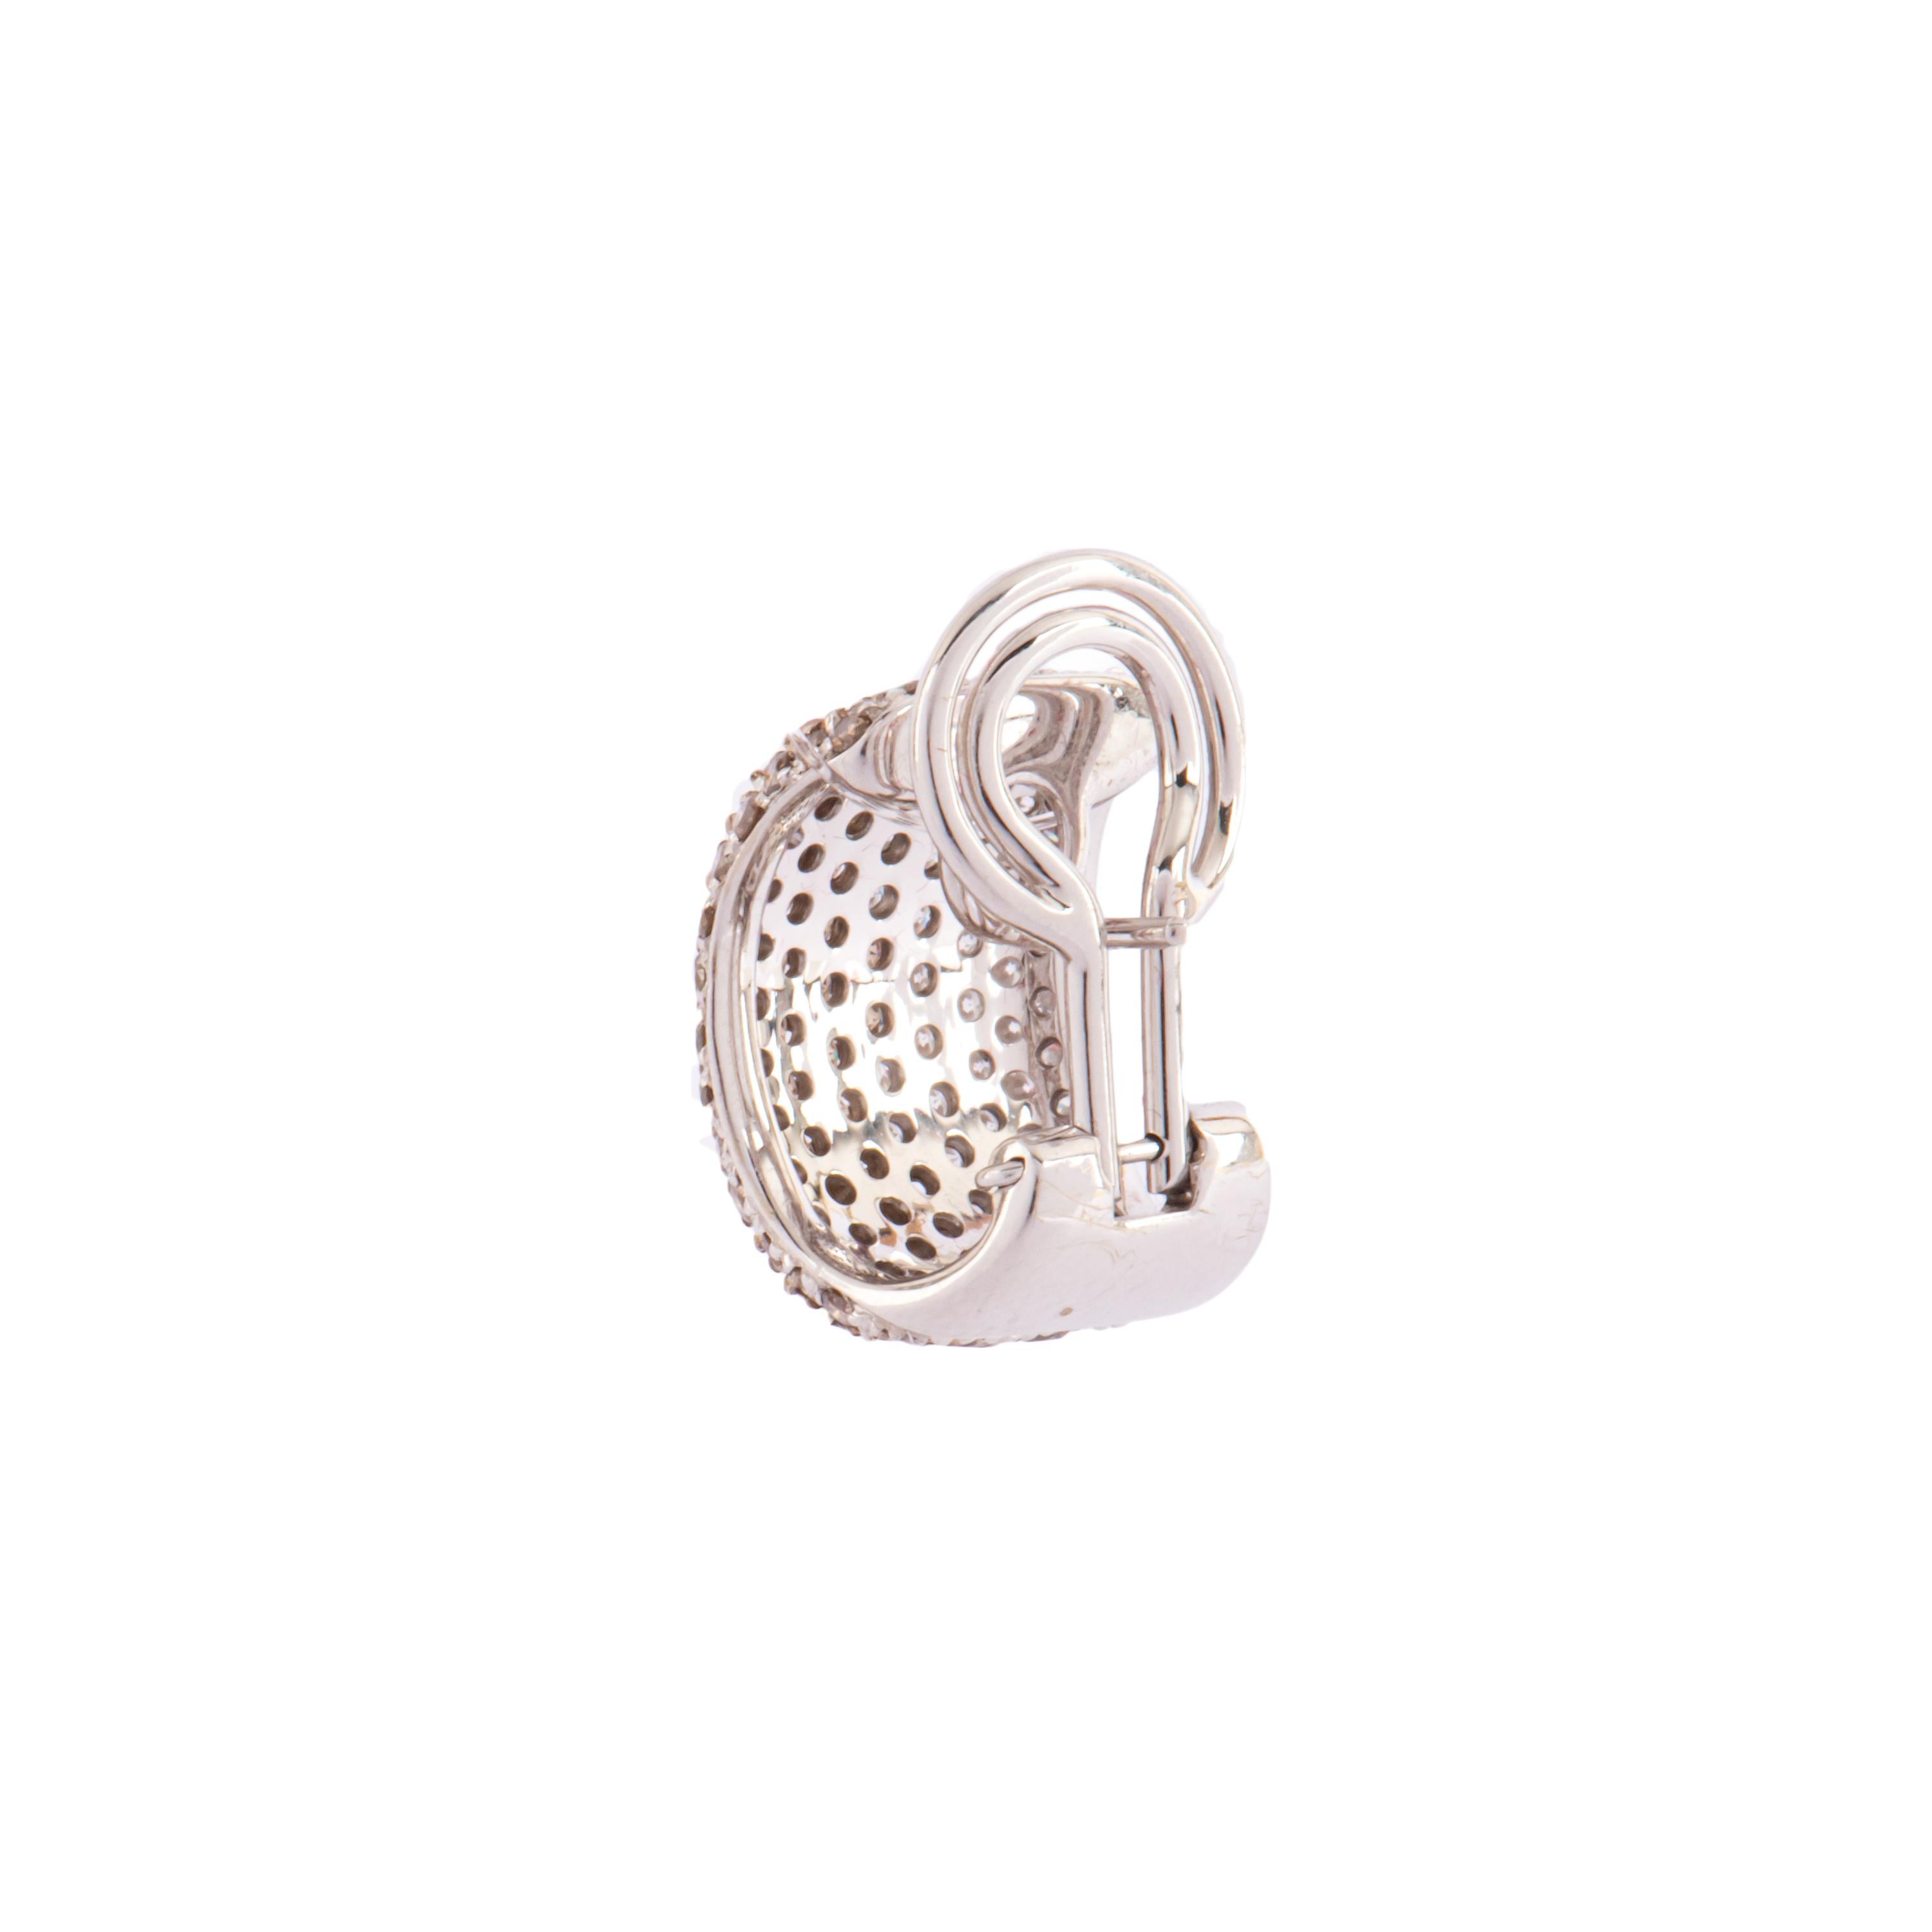 Contemporary White Gold and Diamonds Earrings